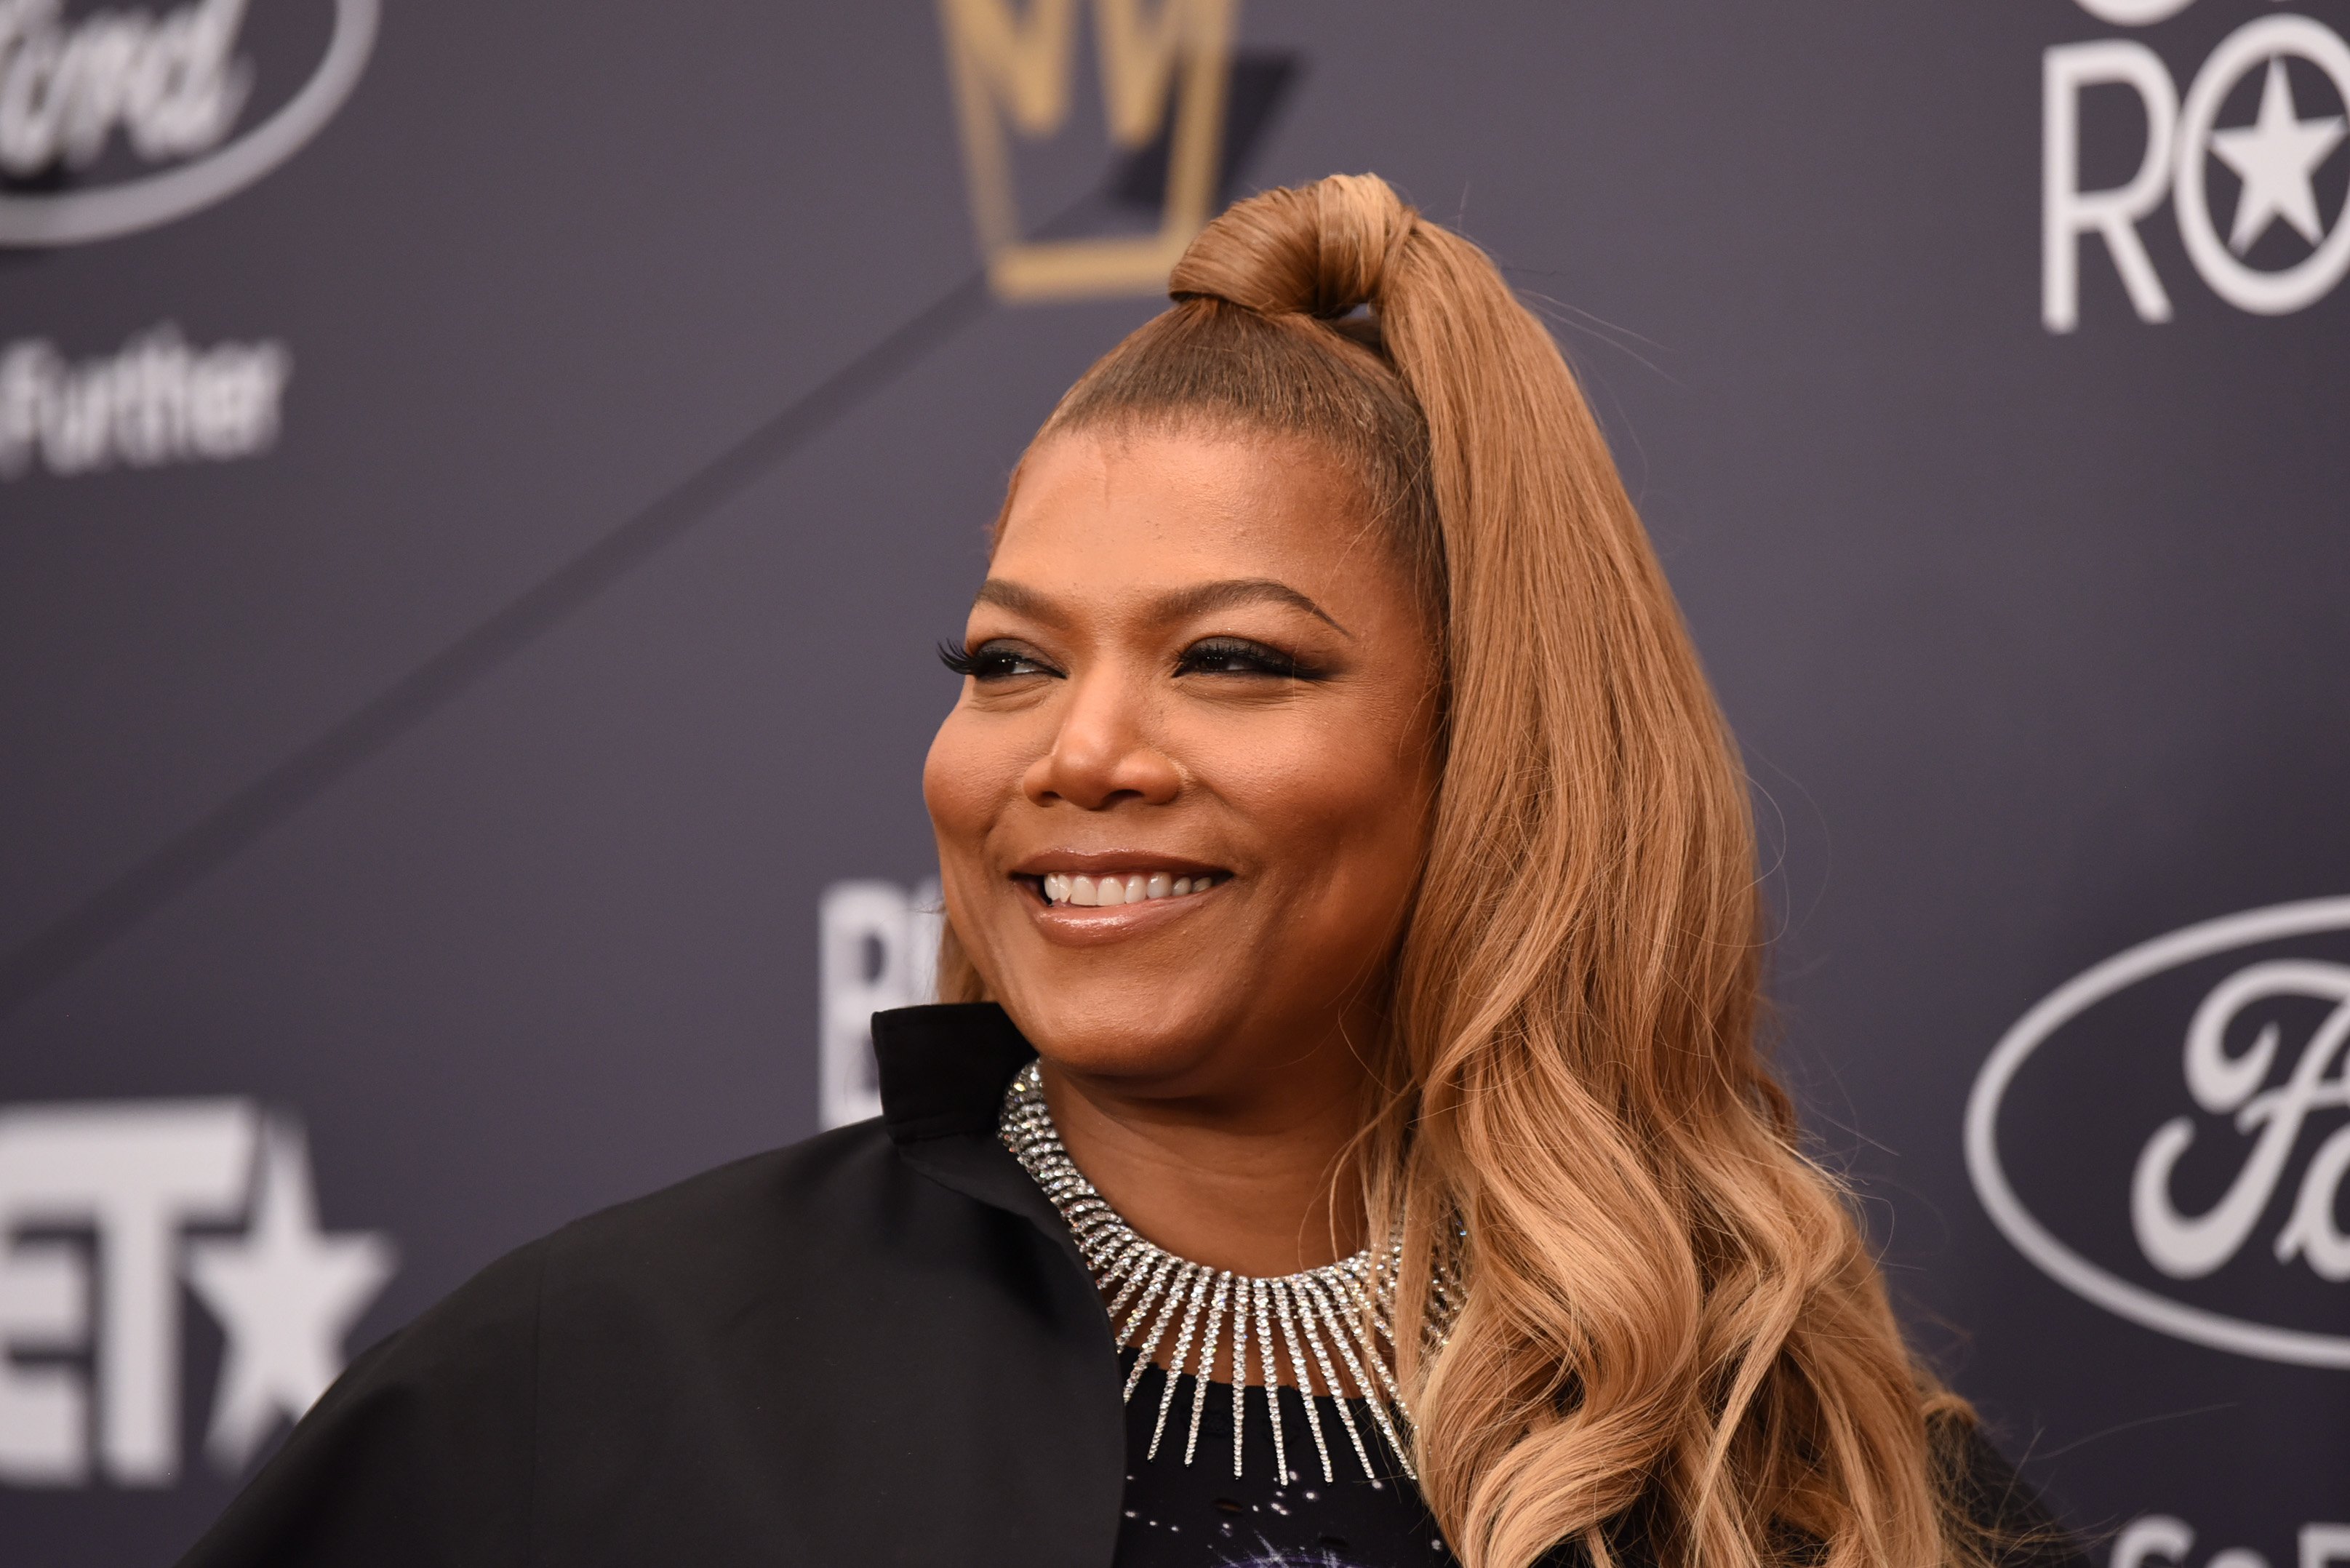 Queen Latifah at the Black Girls Rock! 2018 red carpet on August 26, 2018 in Newark, New Jersey. | Source: Getty Images